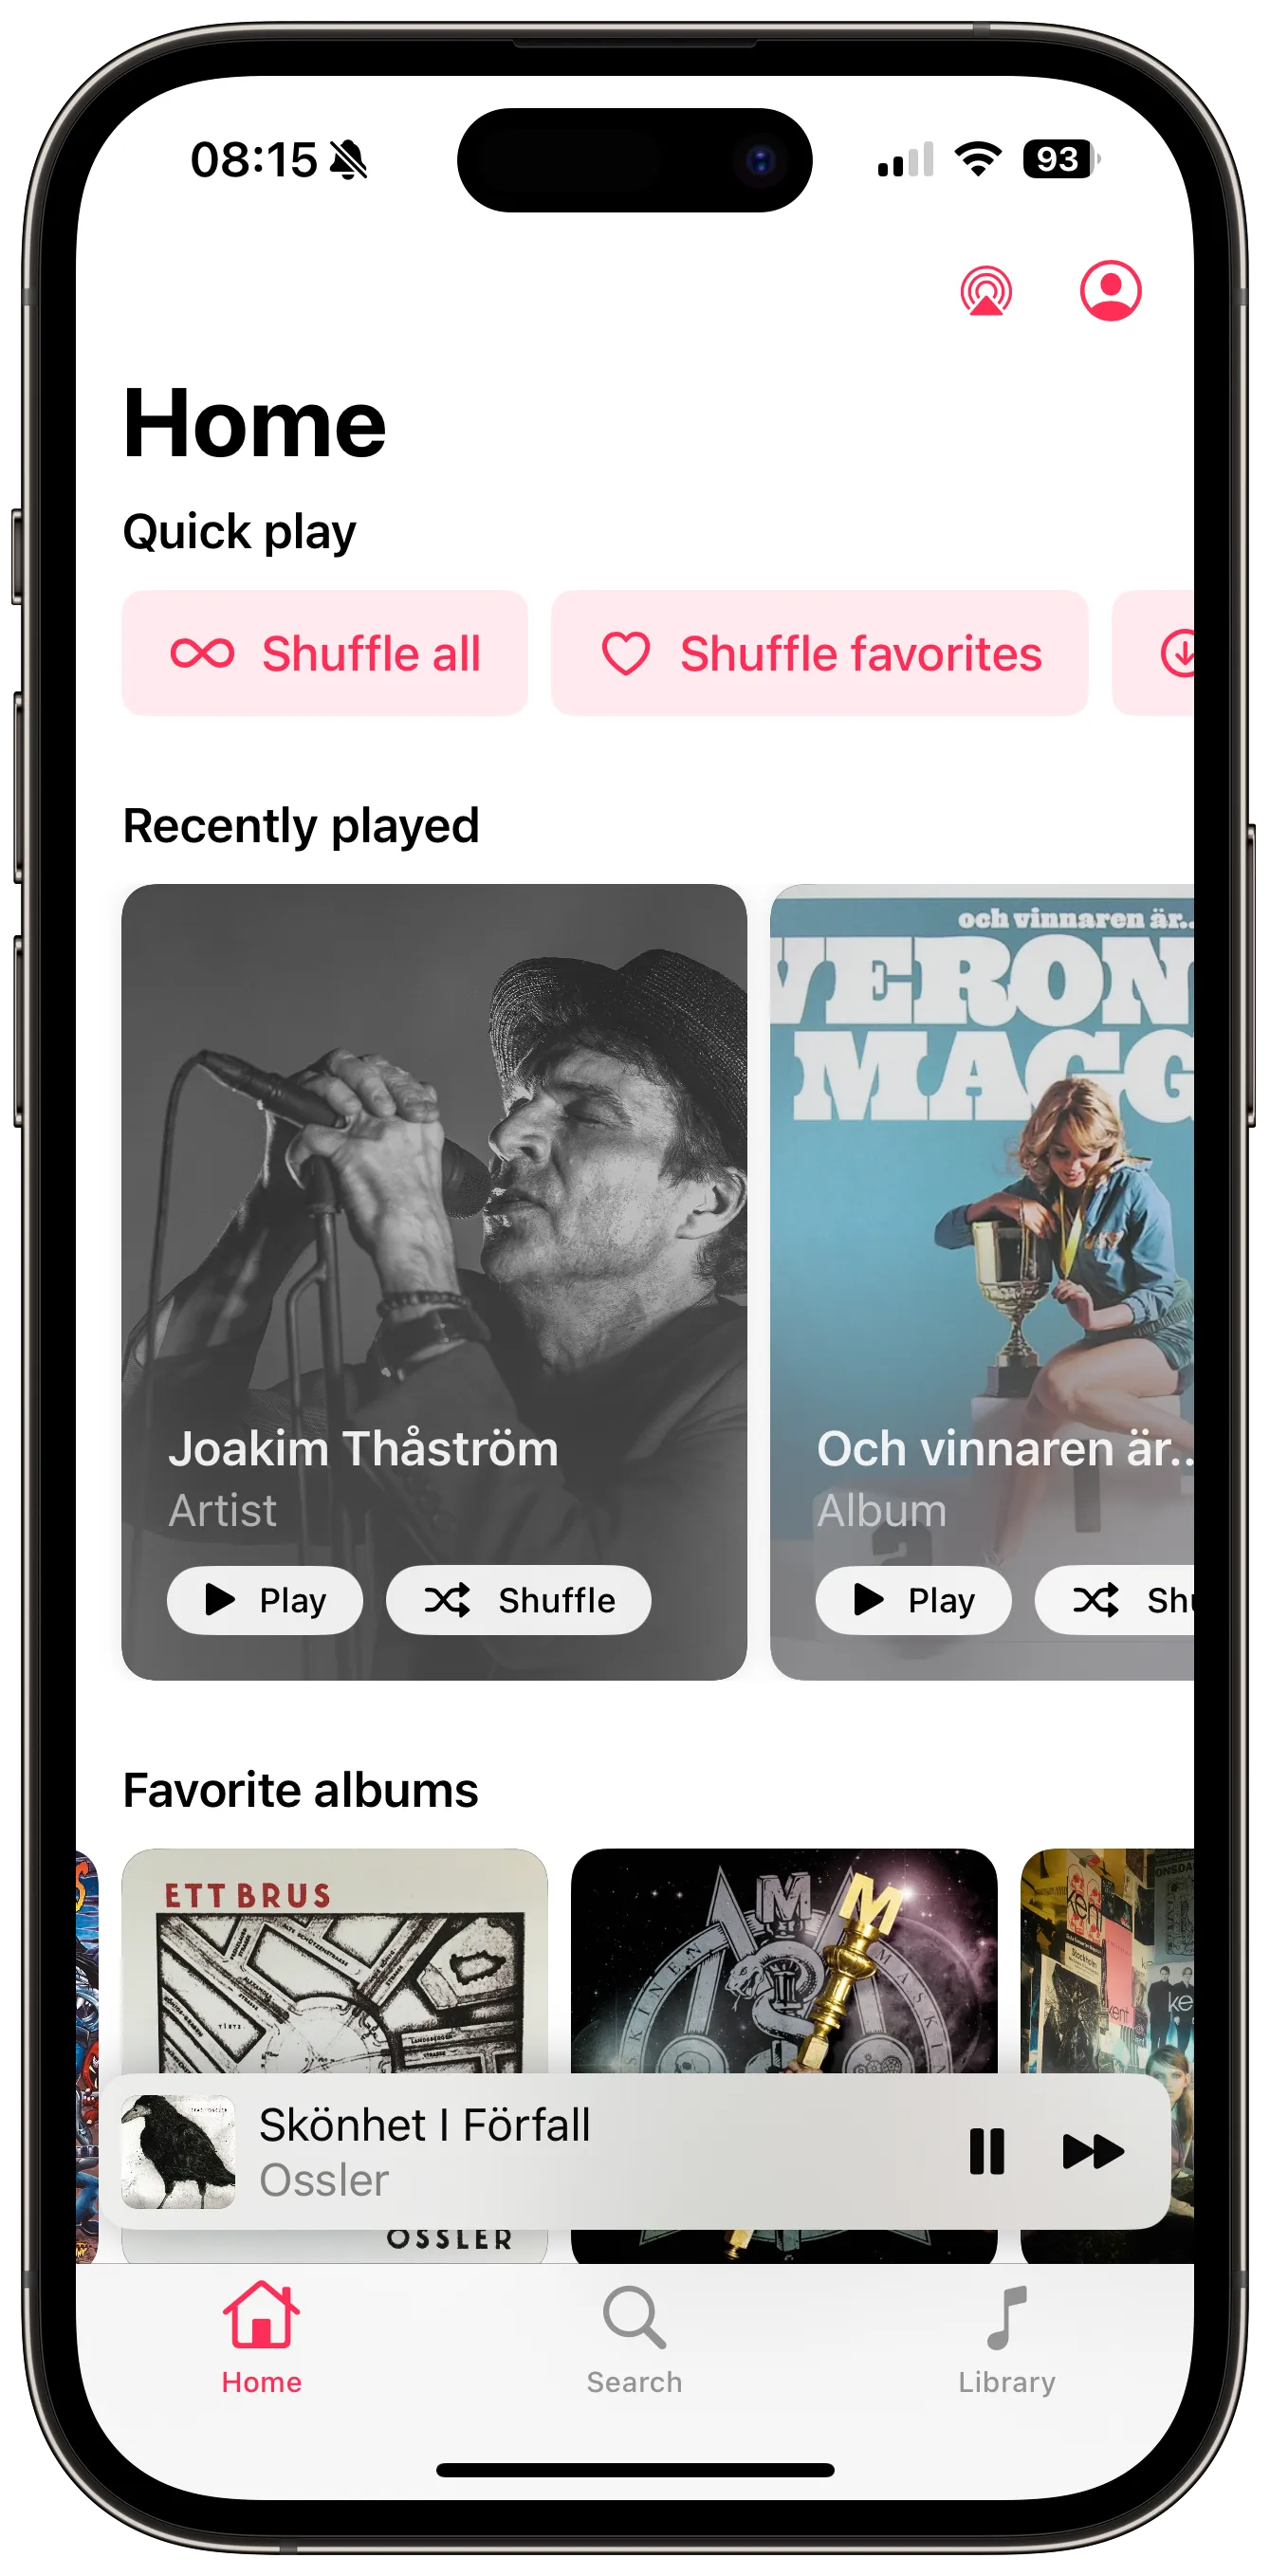 Screenshot of the Home view of the app